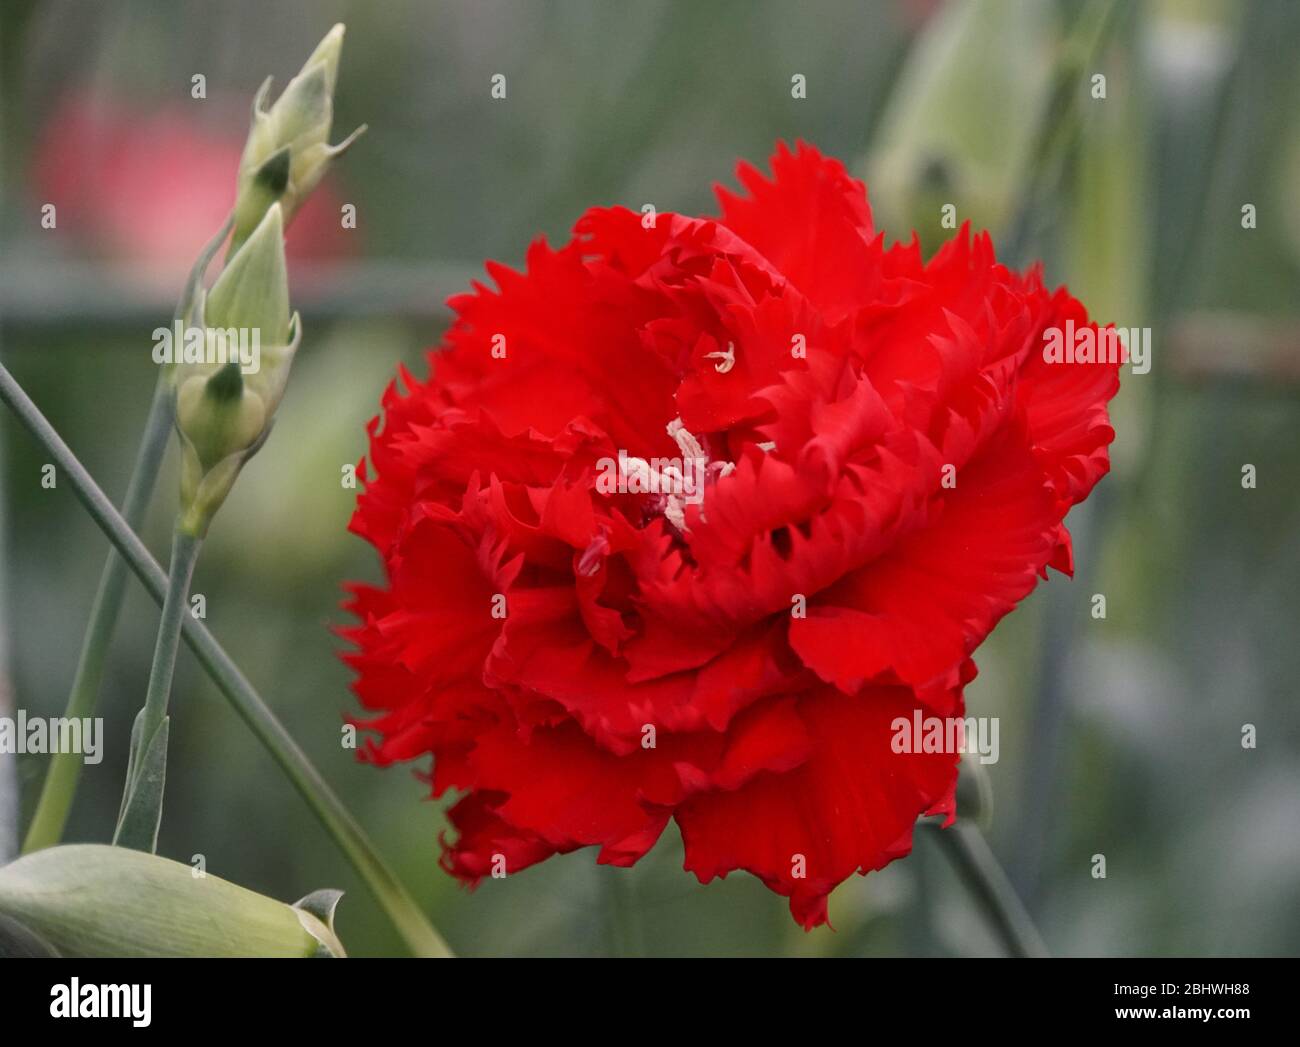 A single red carnation flower at full bloom Stock Photo - Alamy